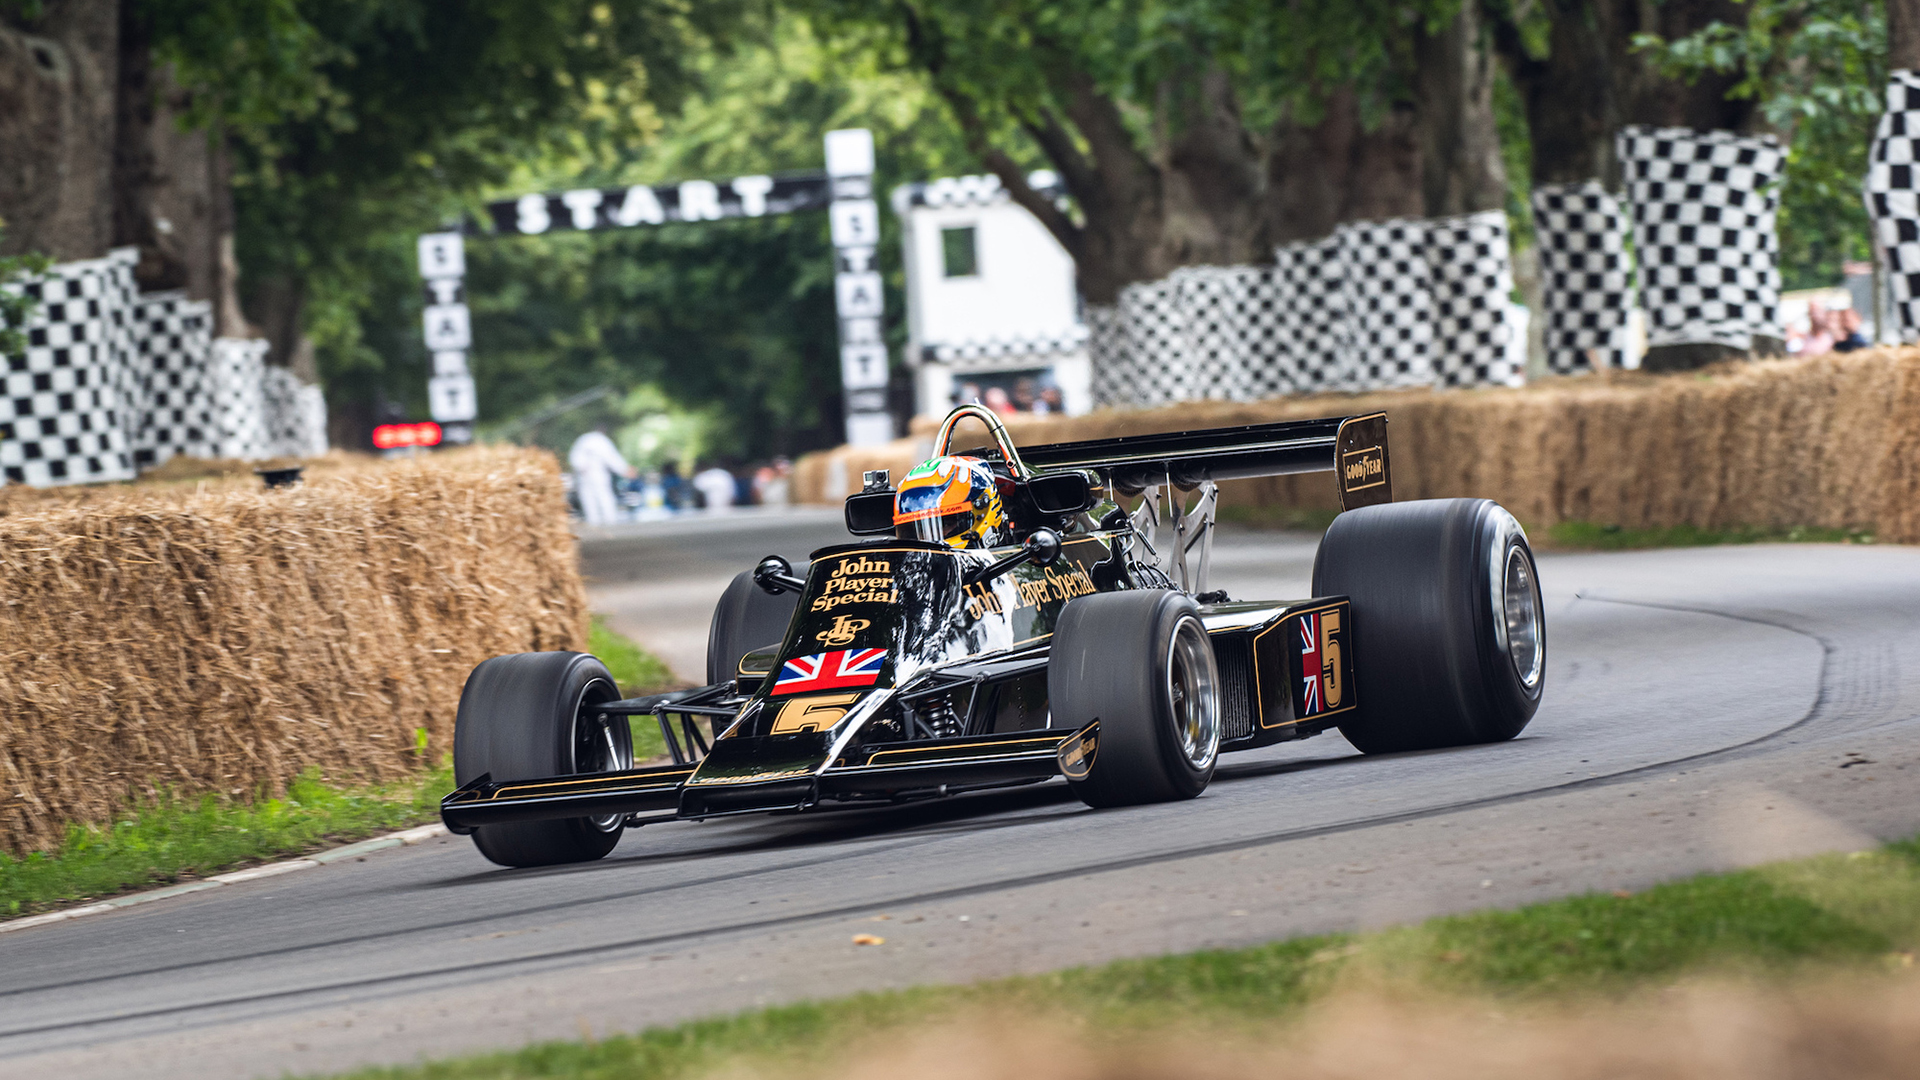 A Formula 1 Lotus from the late 1970s (@GoodwoodRRC)